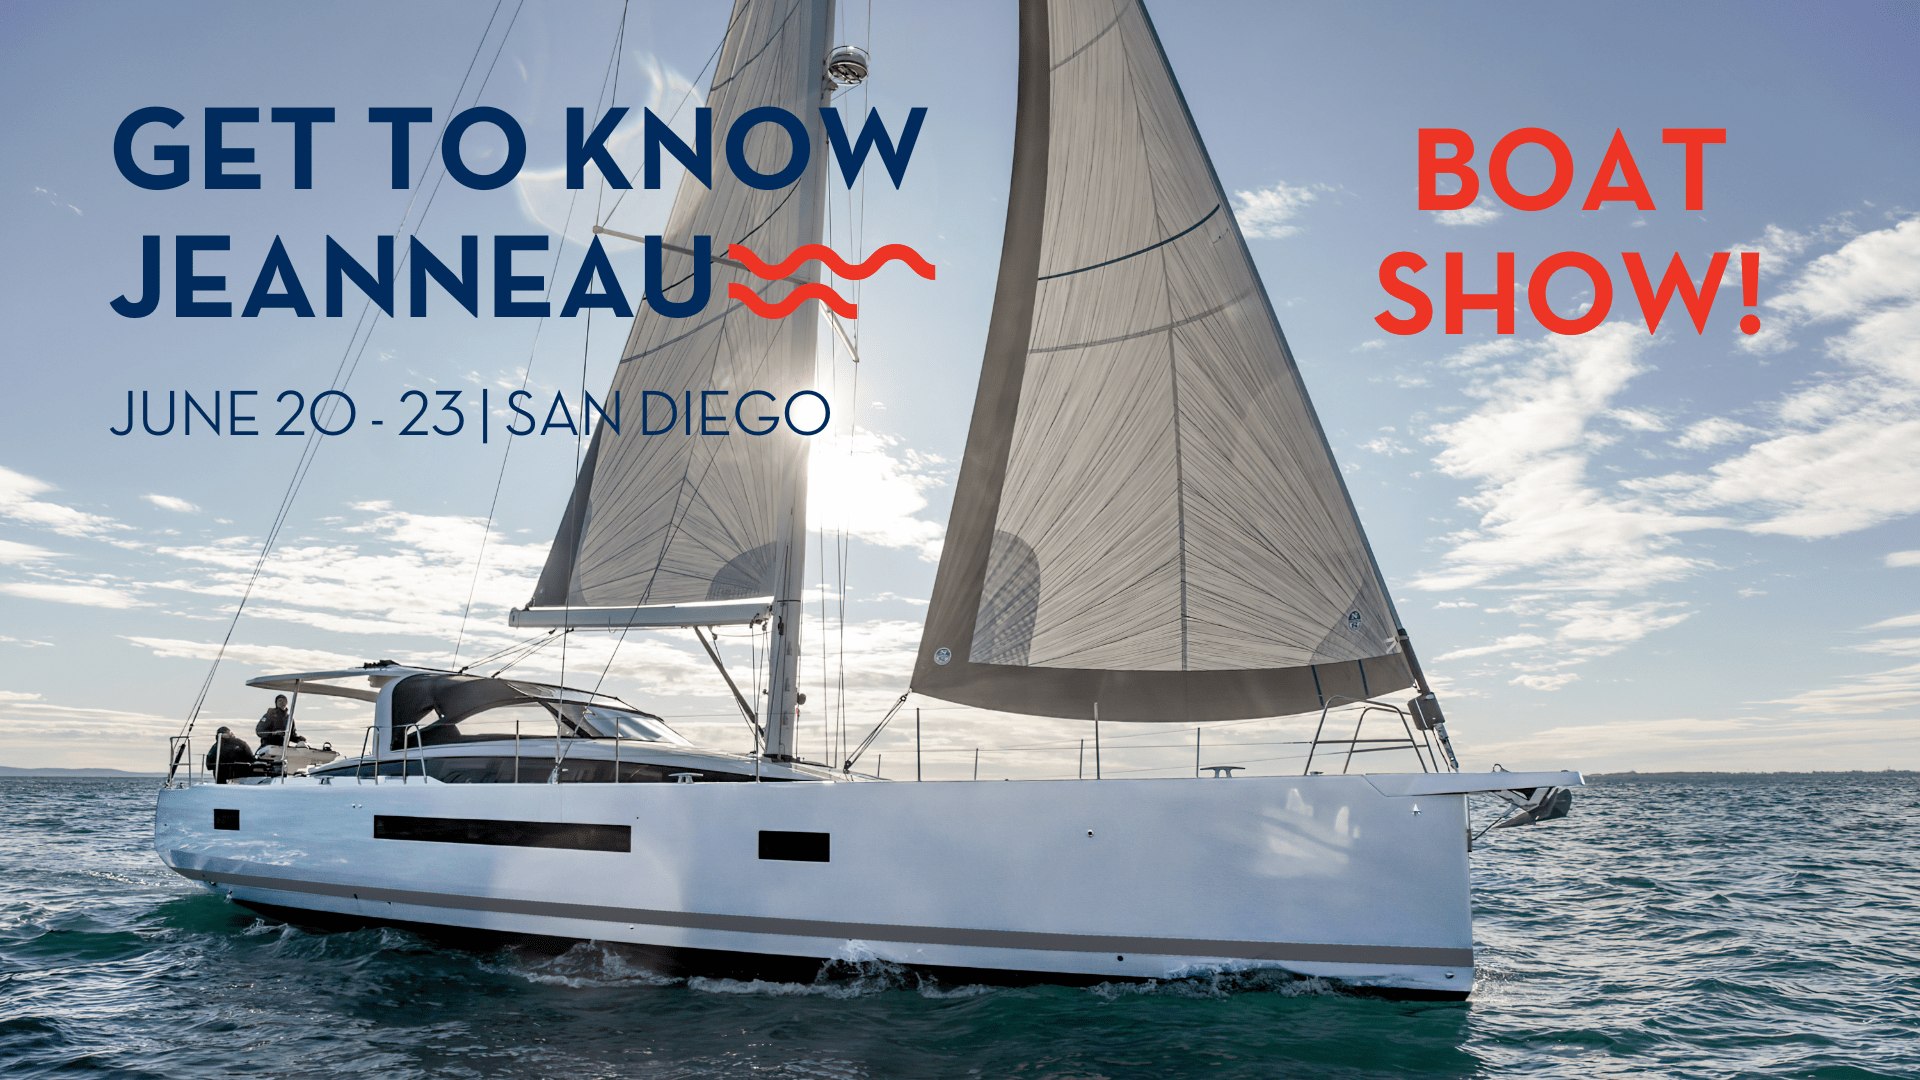 Yacht 60 sailing and advertising get to know jeanneau event in june